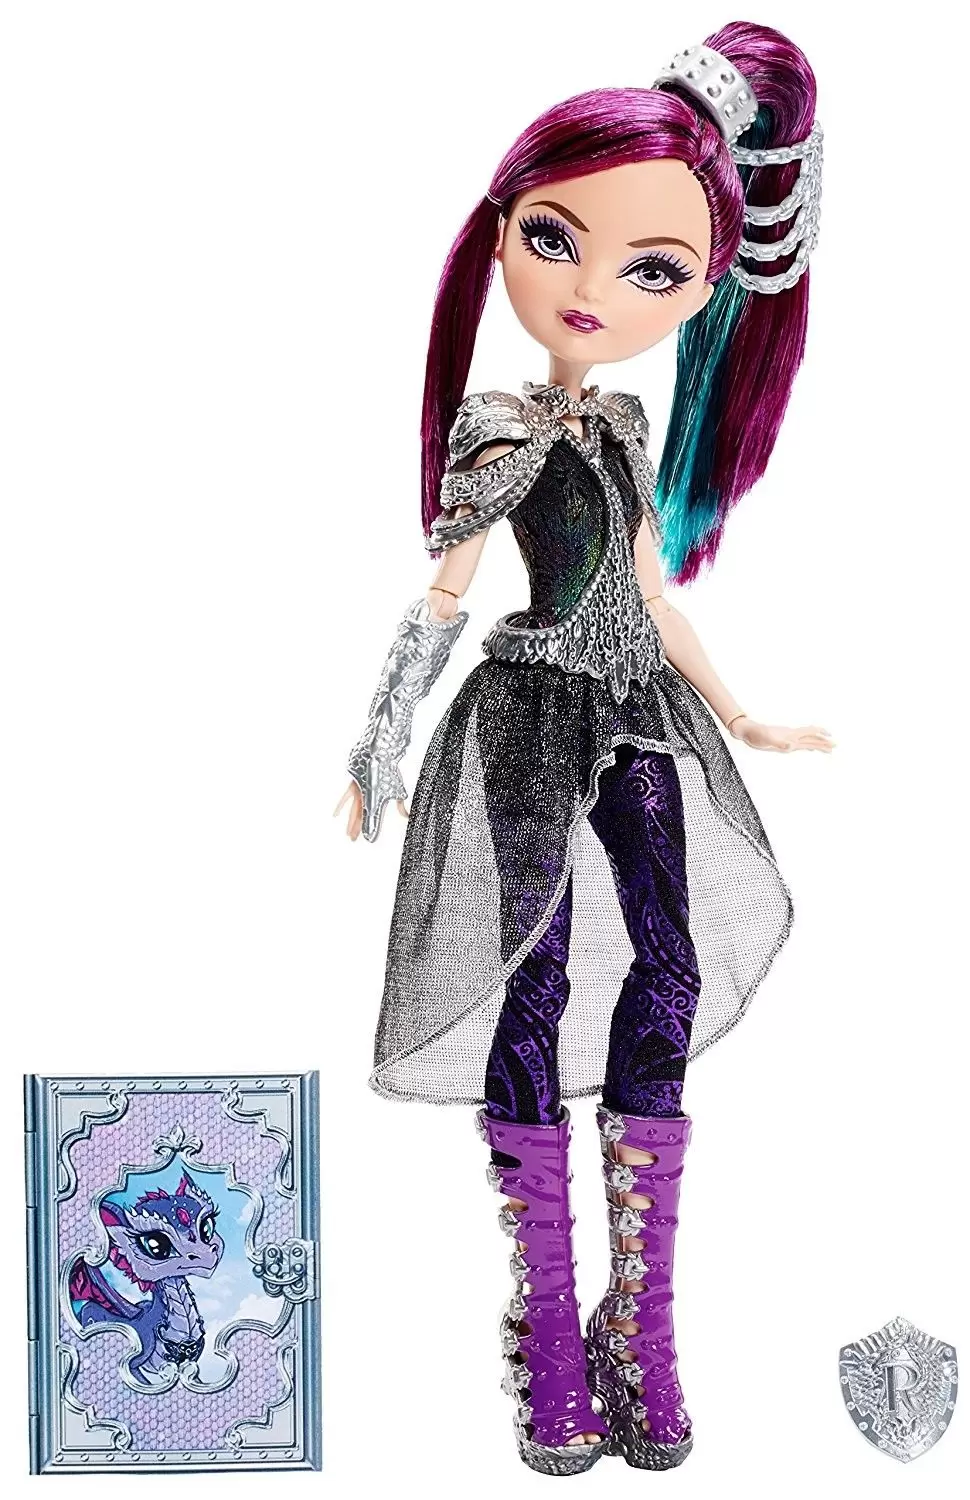  Mattel Ever After High Legacy Day Raven Queen Fashion Doll :  Toys & Games